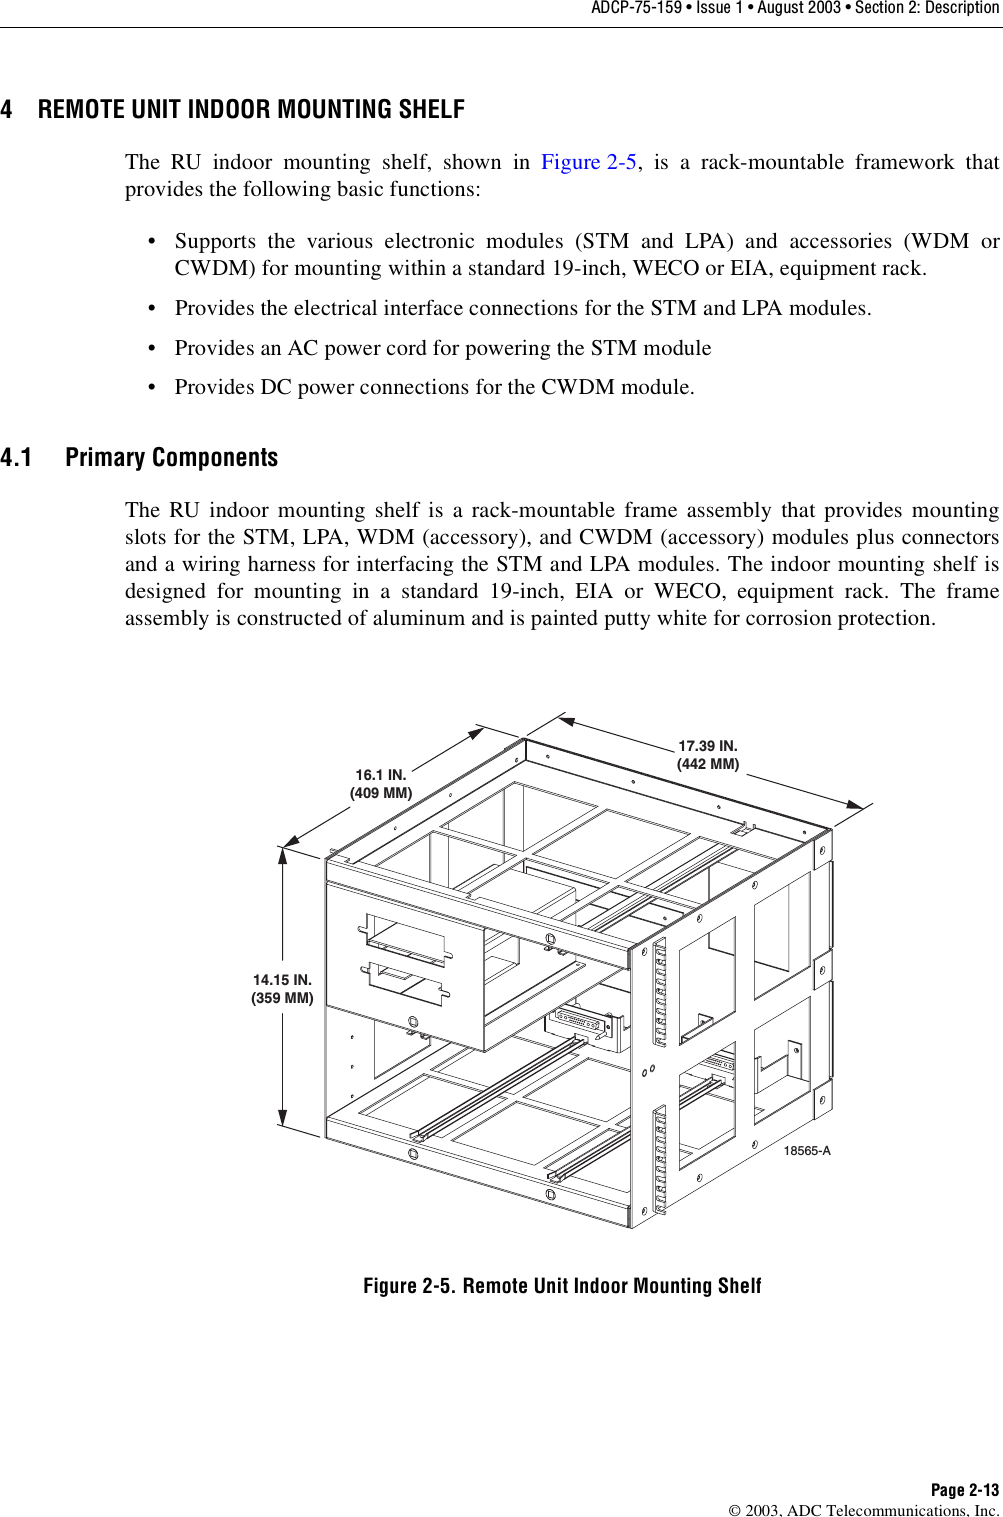 ADCP-75-159 • Issue 1 • August 2003 • Section 2: DescriptionPage 2-13© 2003, ADC Telecommunications, Inc.4 REMOTE UNIT INDOOR MOUNTING SHELFThe RU indoor mounting shelf, shown in Figure 2-5, is a rack-mountable framework thatprovides the following basic functions: • Supports the various electronic modules (STM and LPA) and accessories (WDM orCWDM) for mounting within a standard 19-inch, WECO or EIA, equipment rack. • Provides the electrical interface connections for the STM and LPA modules. • Provides an AC power cord for powering the STM module• Provides DC power connections for the CWDM module. 4.1 Primary ComponentsThe RU indoor mounting shelf is a rack-mountable frame assembly that provides mountingslots for the STM, LPA, WDM (accessory), and CWDM (accessory) modules plus connectorsand a wiring harness for interfacing the STM and LPA modules. The indoor mounting shelf isdesigned for mounting in a standard 19-inch, EIA or WECO, equipment rack. The frameassembly is constructed of aluminum and is painted putty white for corrosion protection. Figure 2-5. Remote Unit Indoor Mounting Shelf14.15 IN.(359 MM)16.1 IN.(409 MM)17.39 IN.(442 MM)18565-A